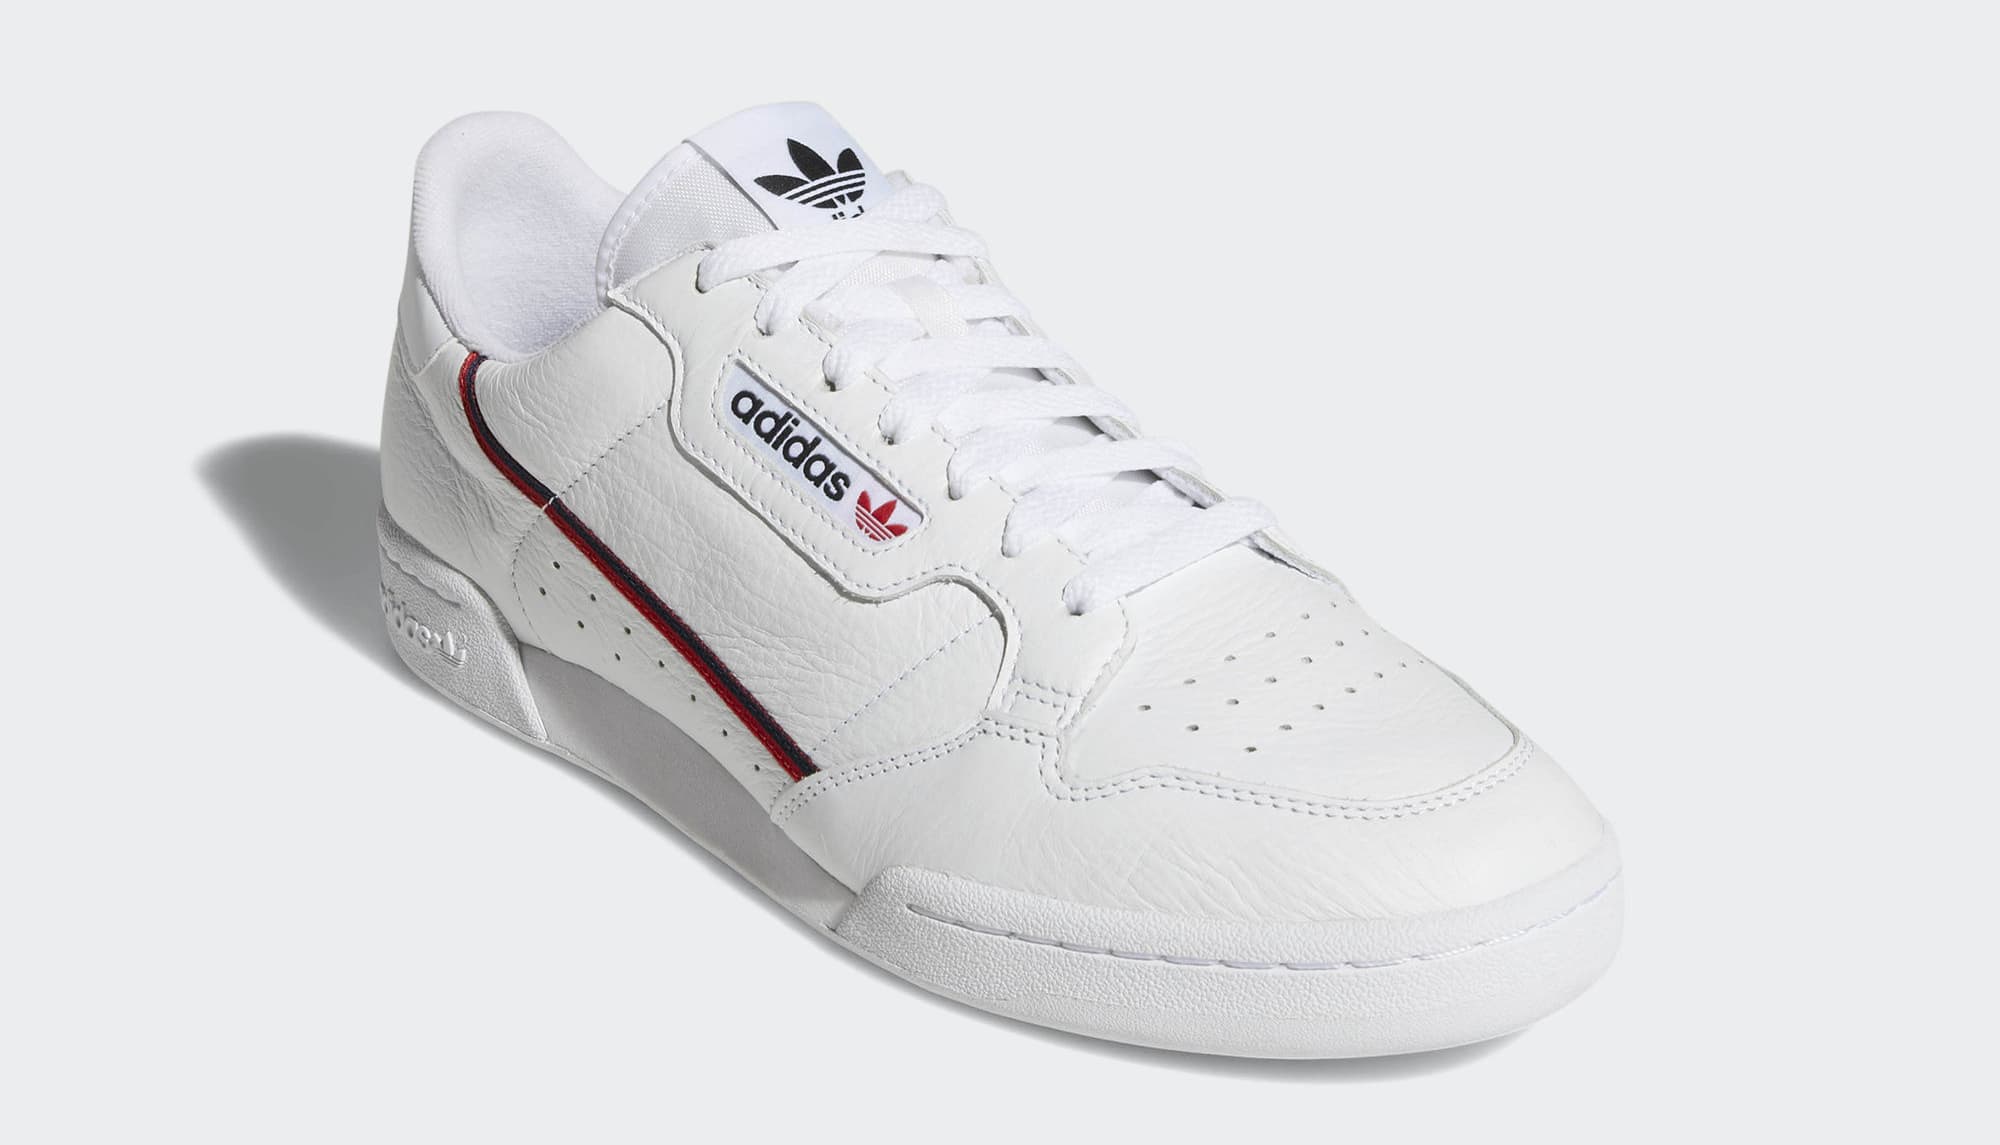 adidas rascal release date - 58% remise 